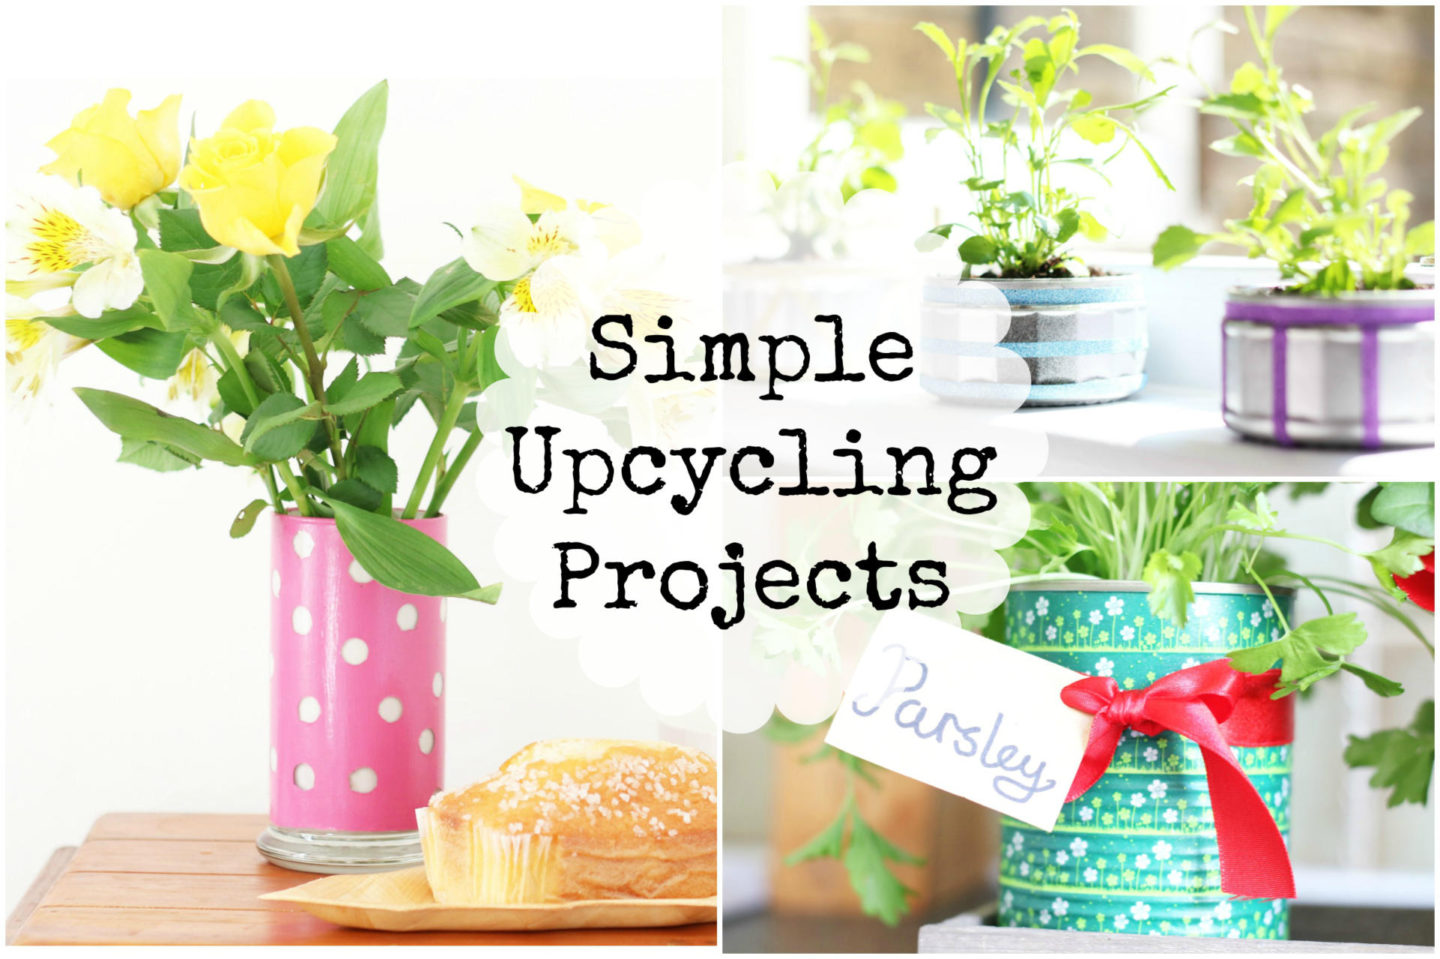 3 Simple Upcycling Projects for British Flower Week